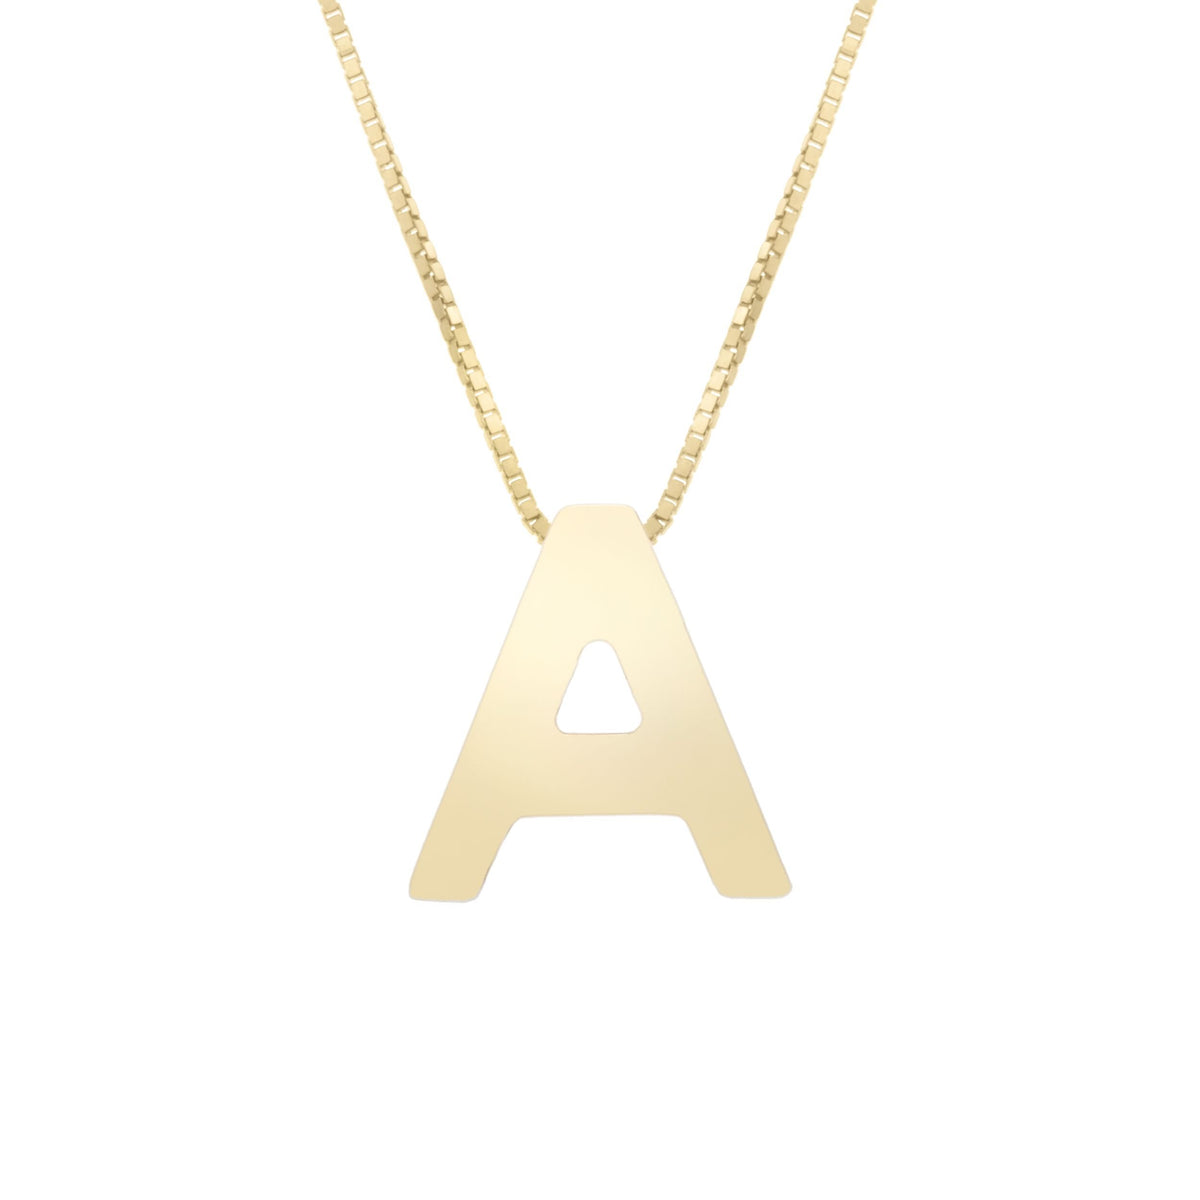 14K Yellow Gold Polished Initial Block Necklace